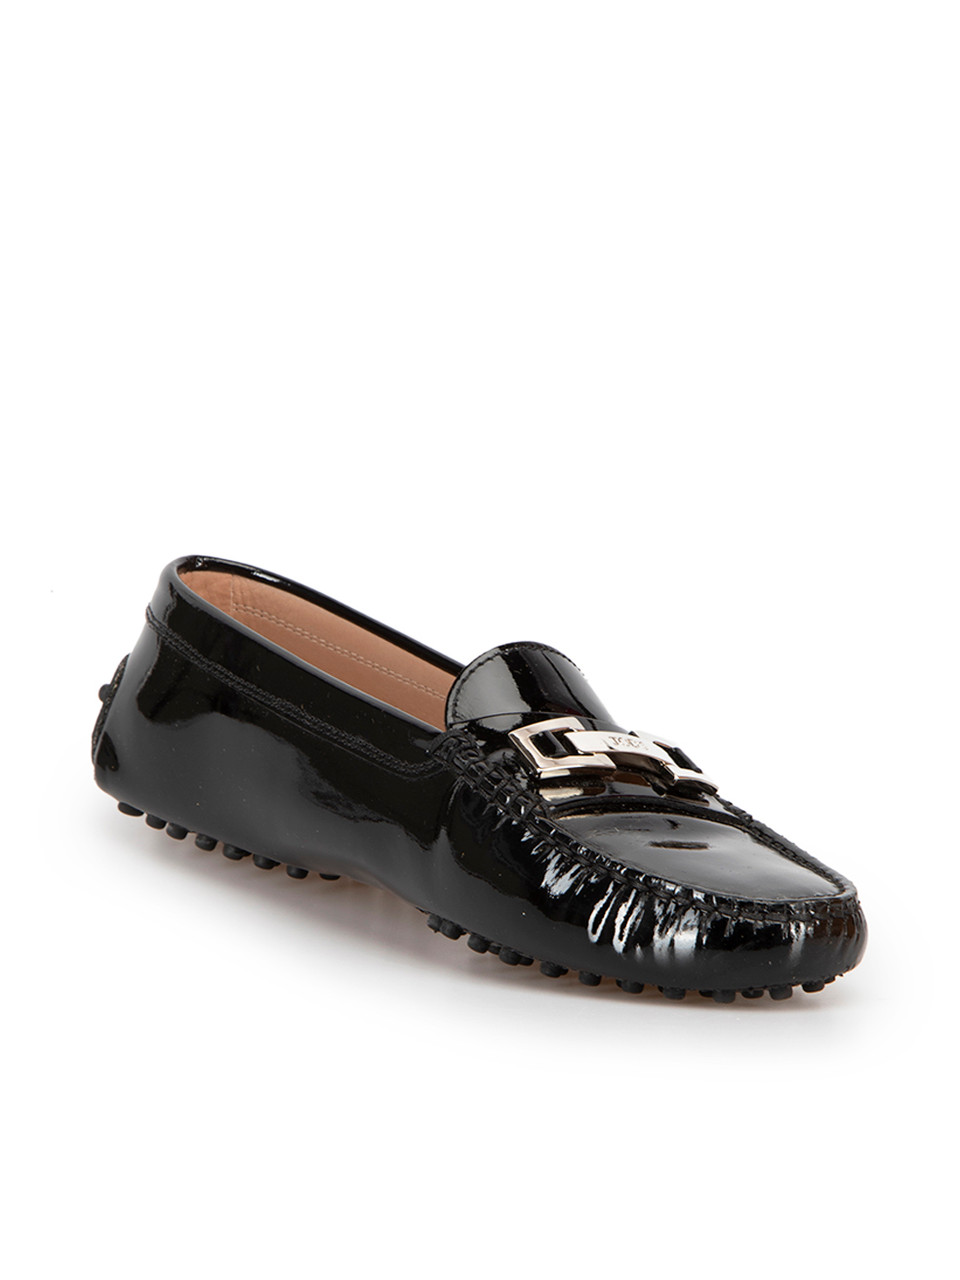 Tod's Black Patent Leather Driving Loafers